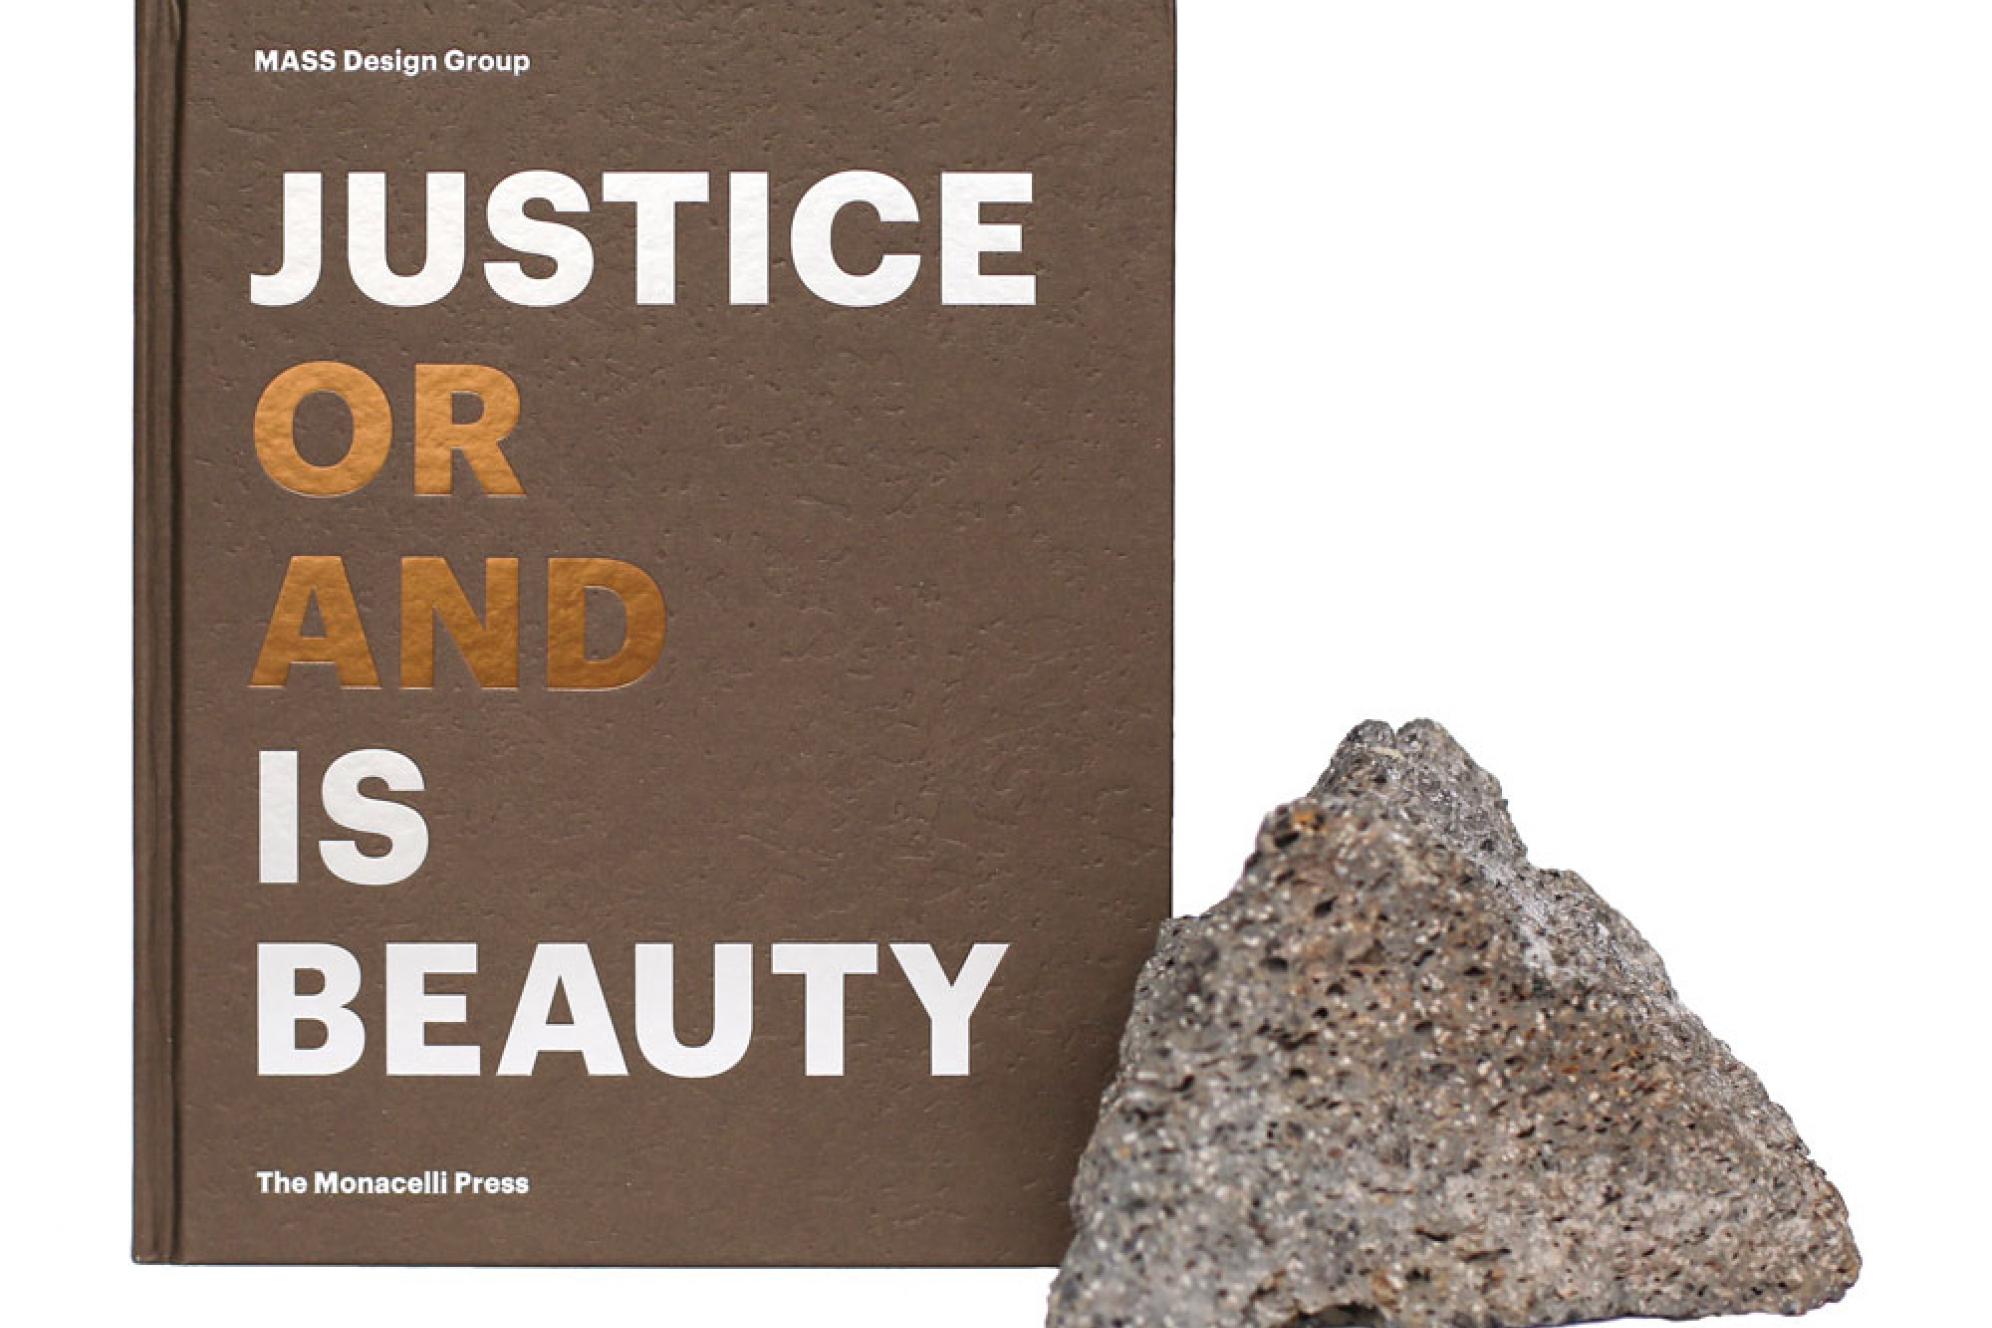 JUSTICE IS BEAUTY